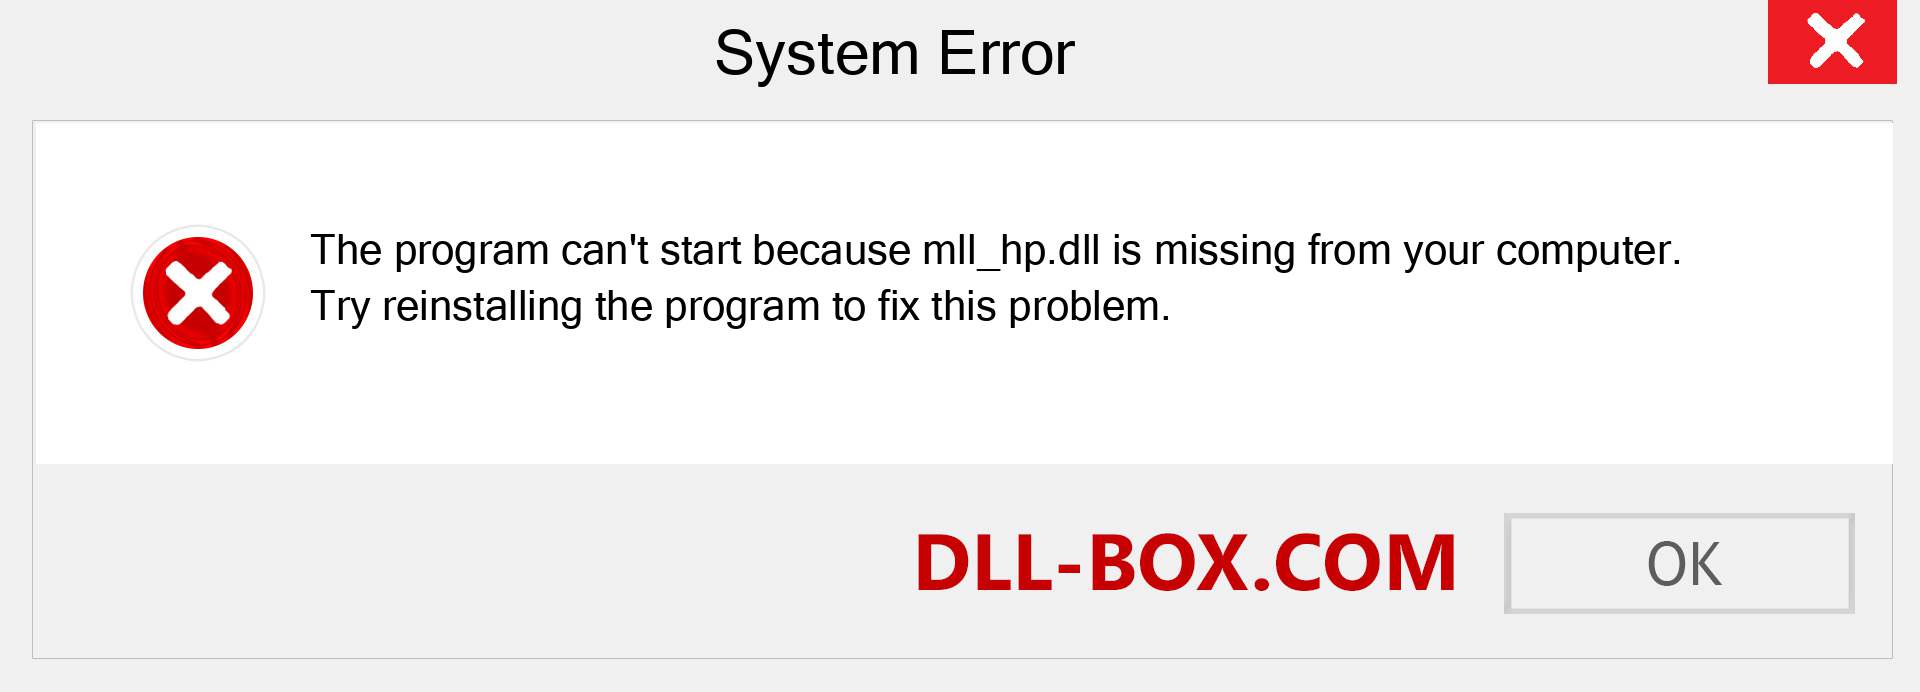  mll_hp.dll file is missing?. Download for Windows 7, 8, 10 - Fix  mll_hp dll Missing Error on Windows, photos, images